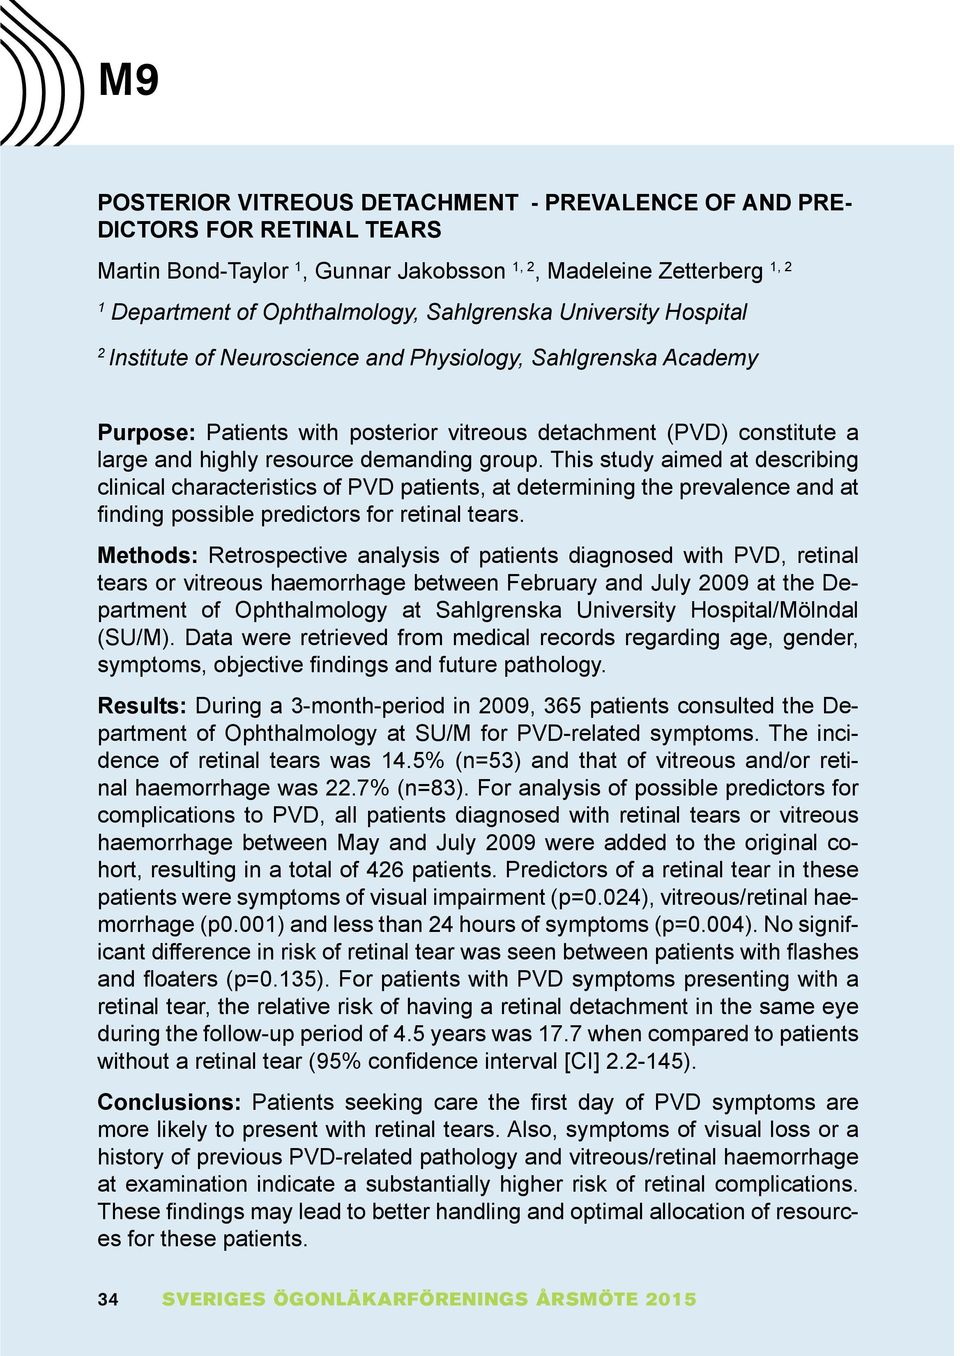 This study aimed at describing clinical characteristics of PVD patients, at determining the prevalence and at nding possible predictors for retinal tears.